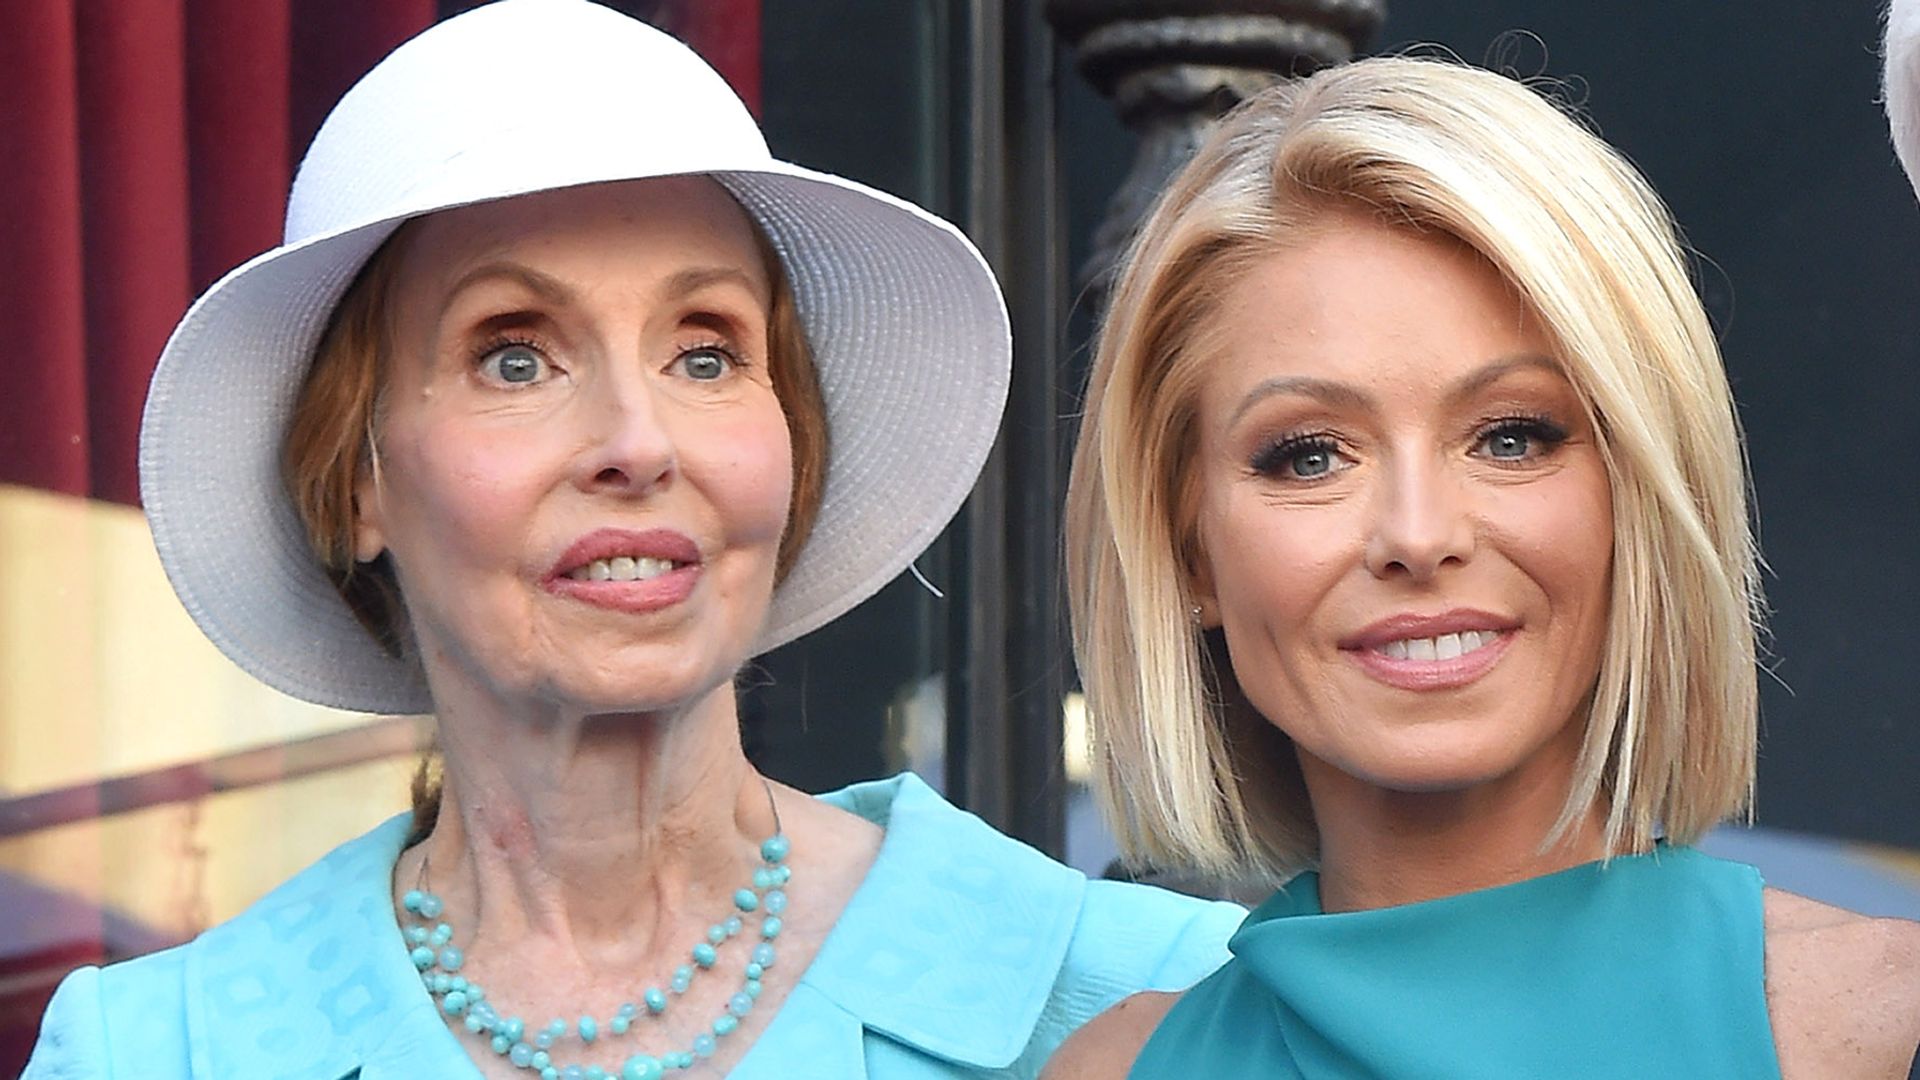 Kelly Ripa and mom Esther Ripa in matching teal outfits